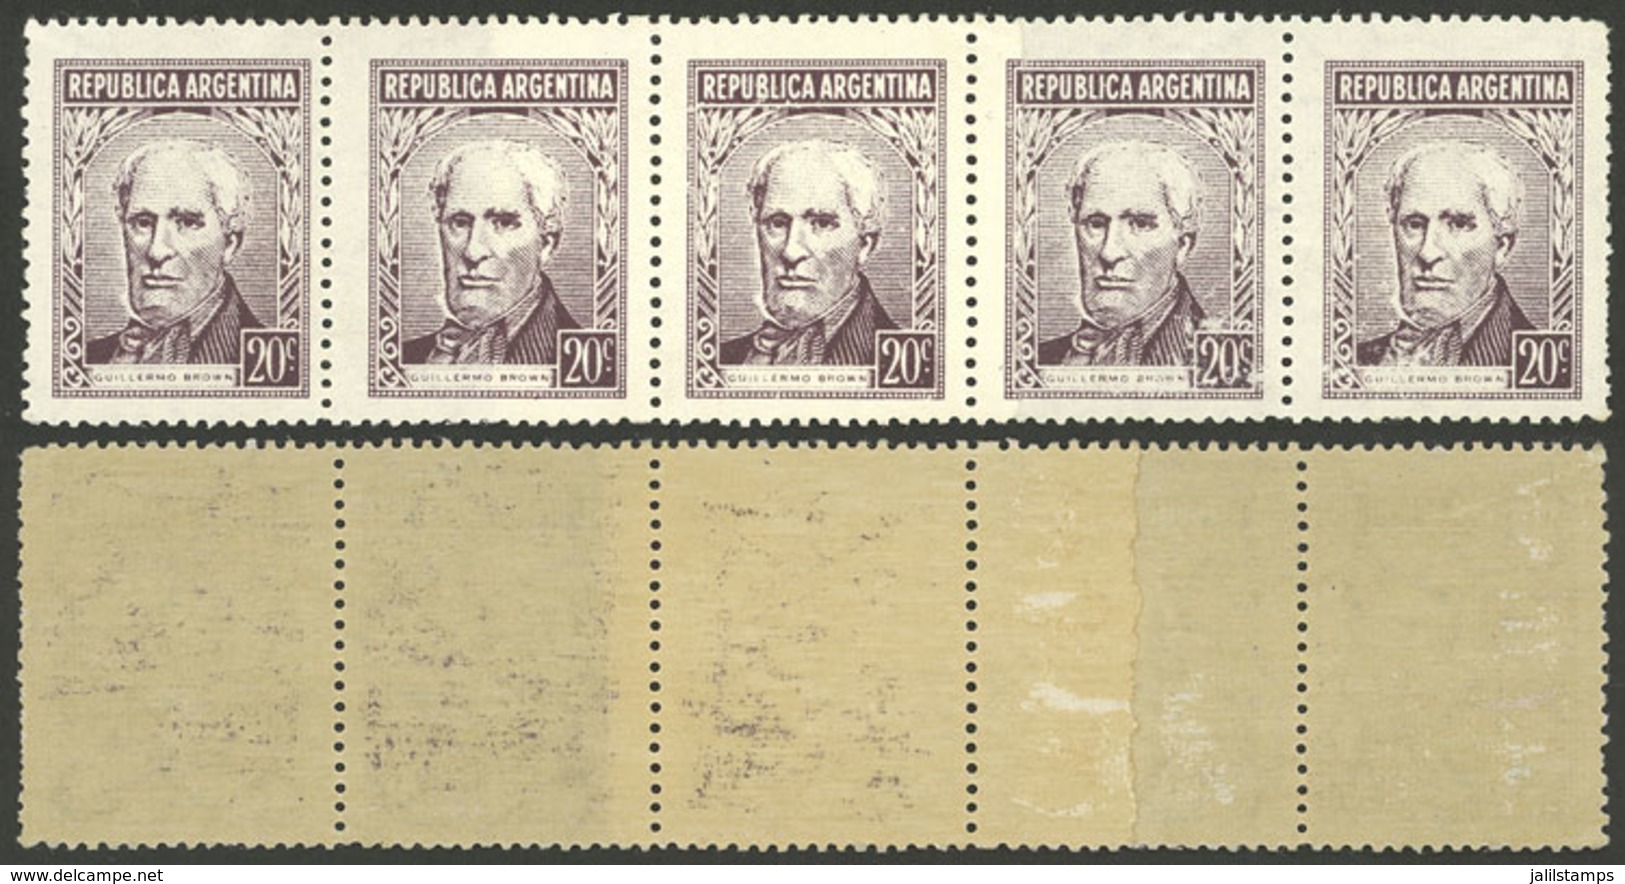 ARGENTINA: GJ.1038, Strip Of 5 With END-OF-ROLL DOUBLE PAPER Variety, VF Quality! - Unused Stamps